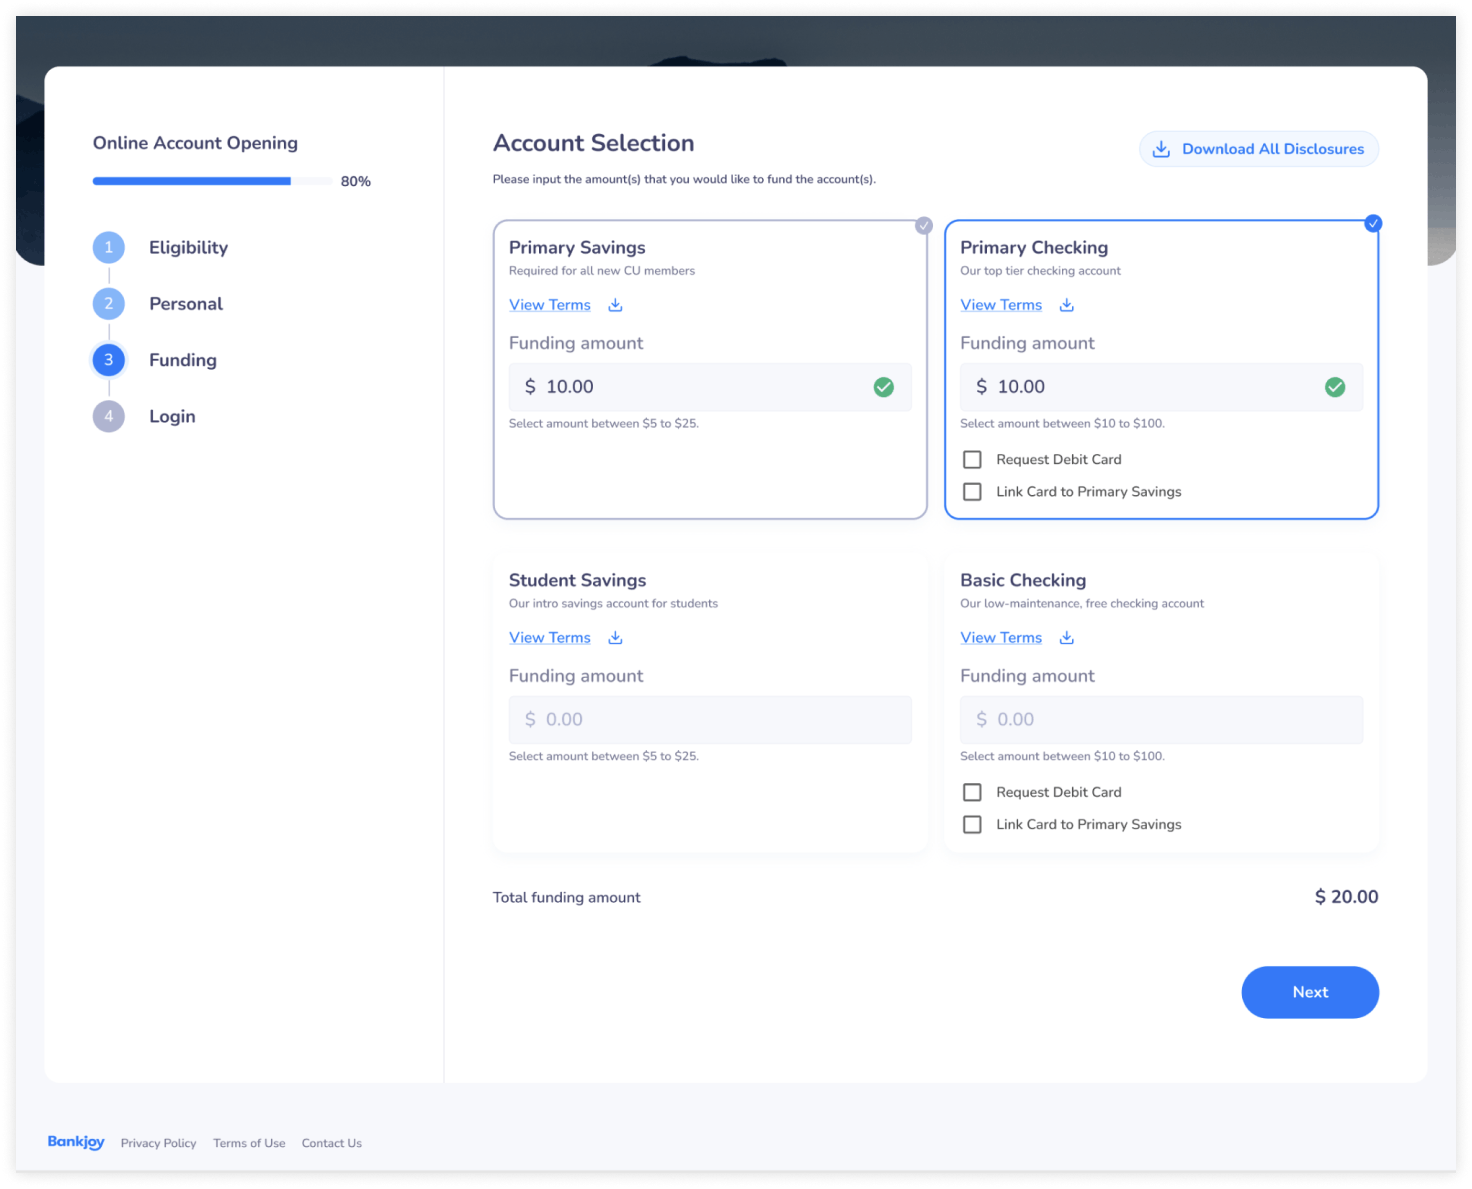 Screenshot of Bankjoy's Online Account Opening "Account Selection" feature